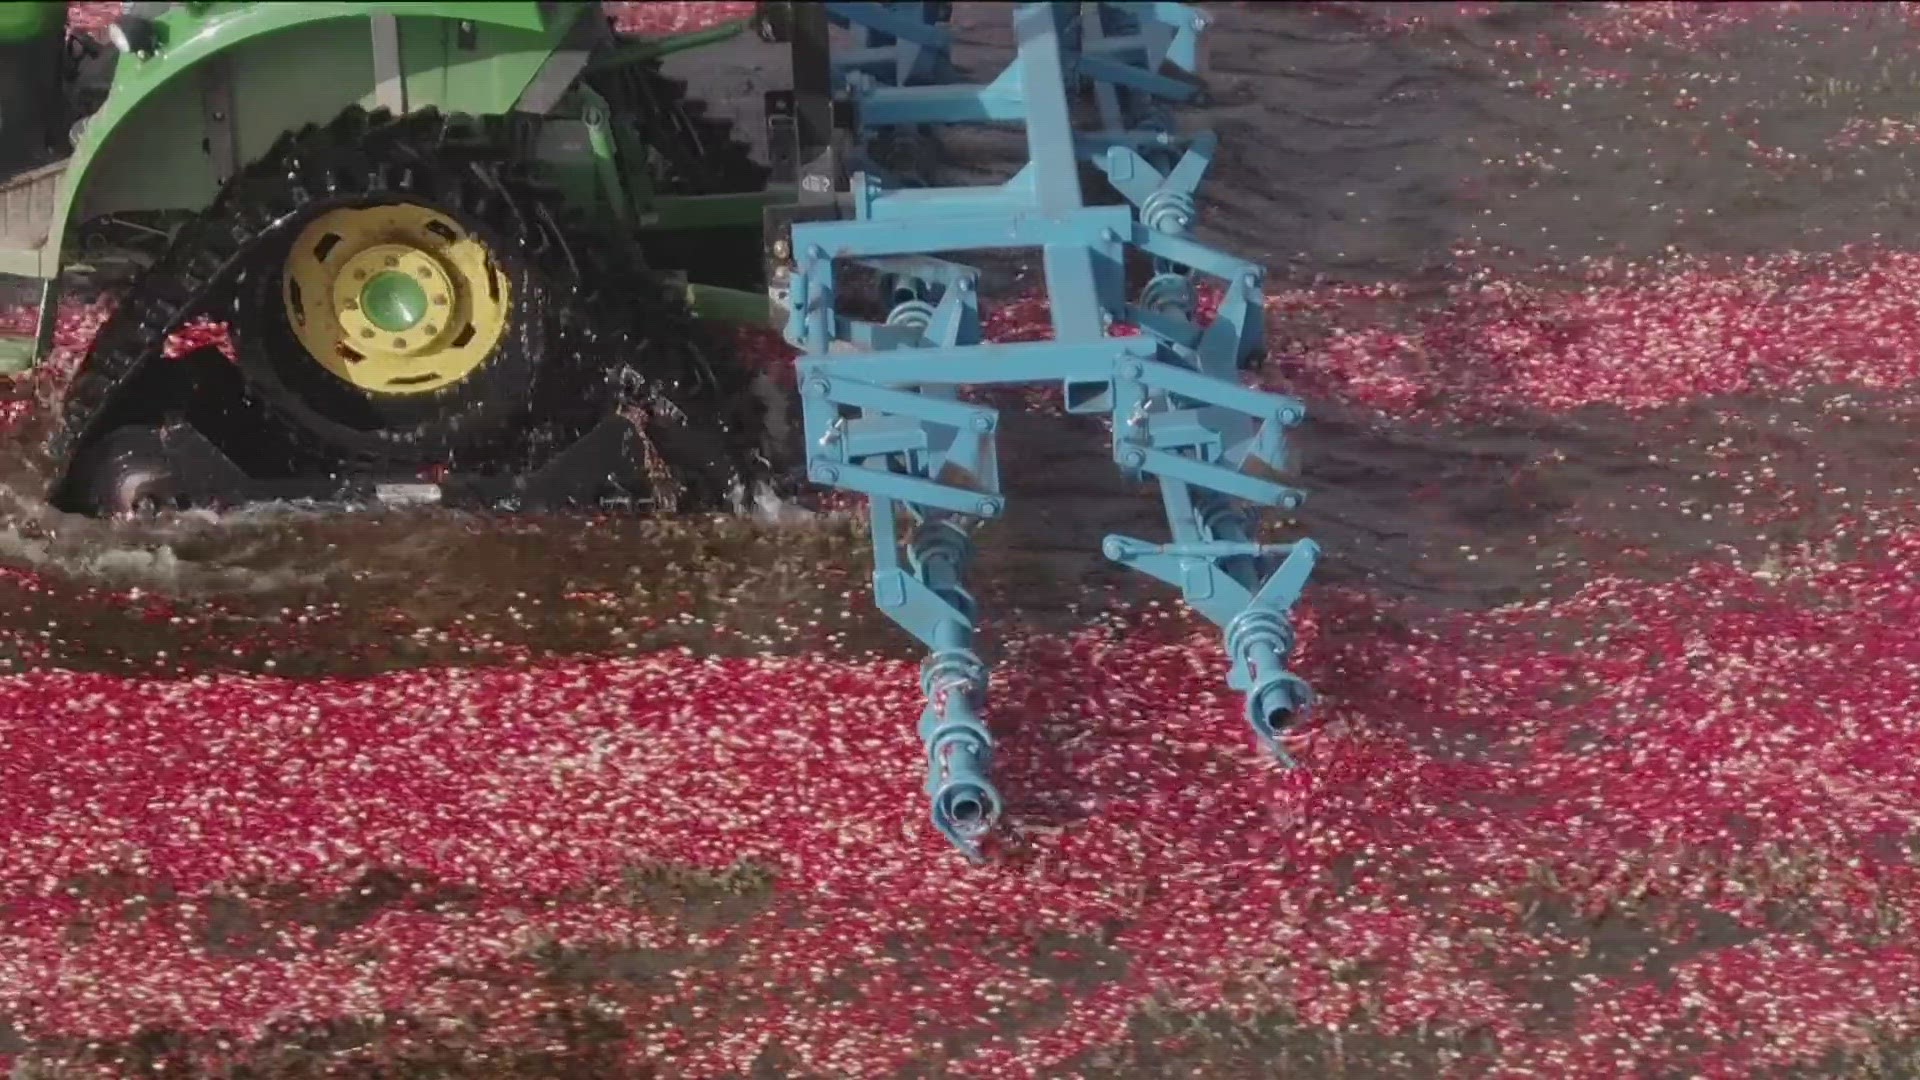 This Dempze family planted their first cranberries more than 100 years ago.